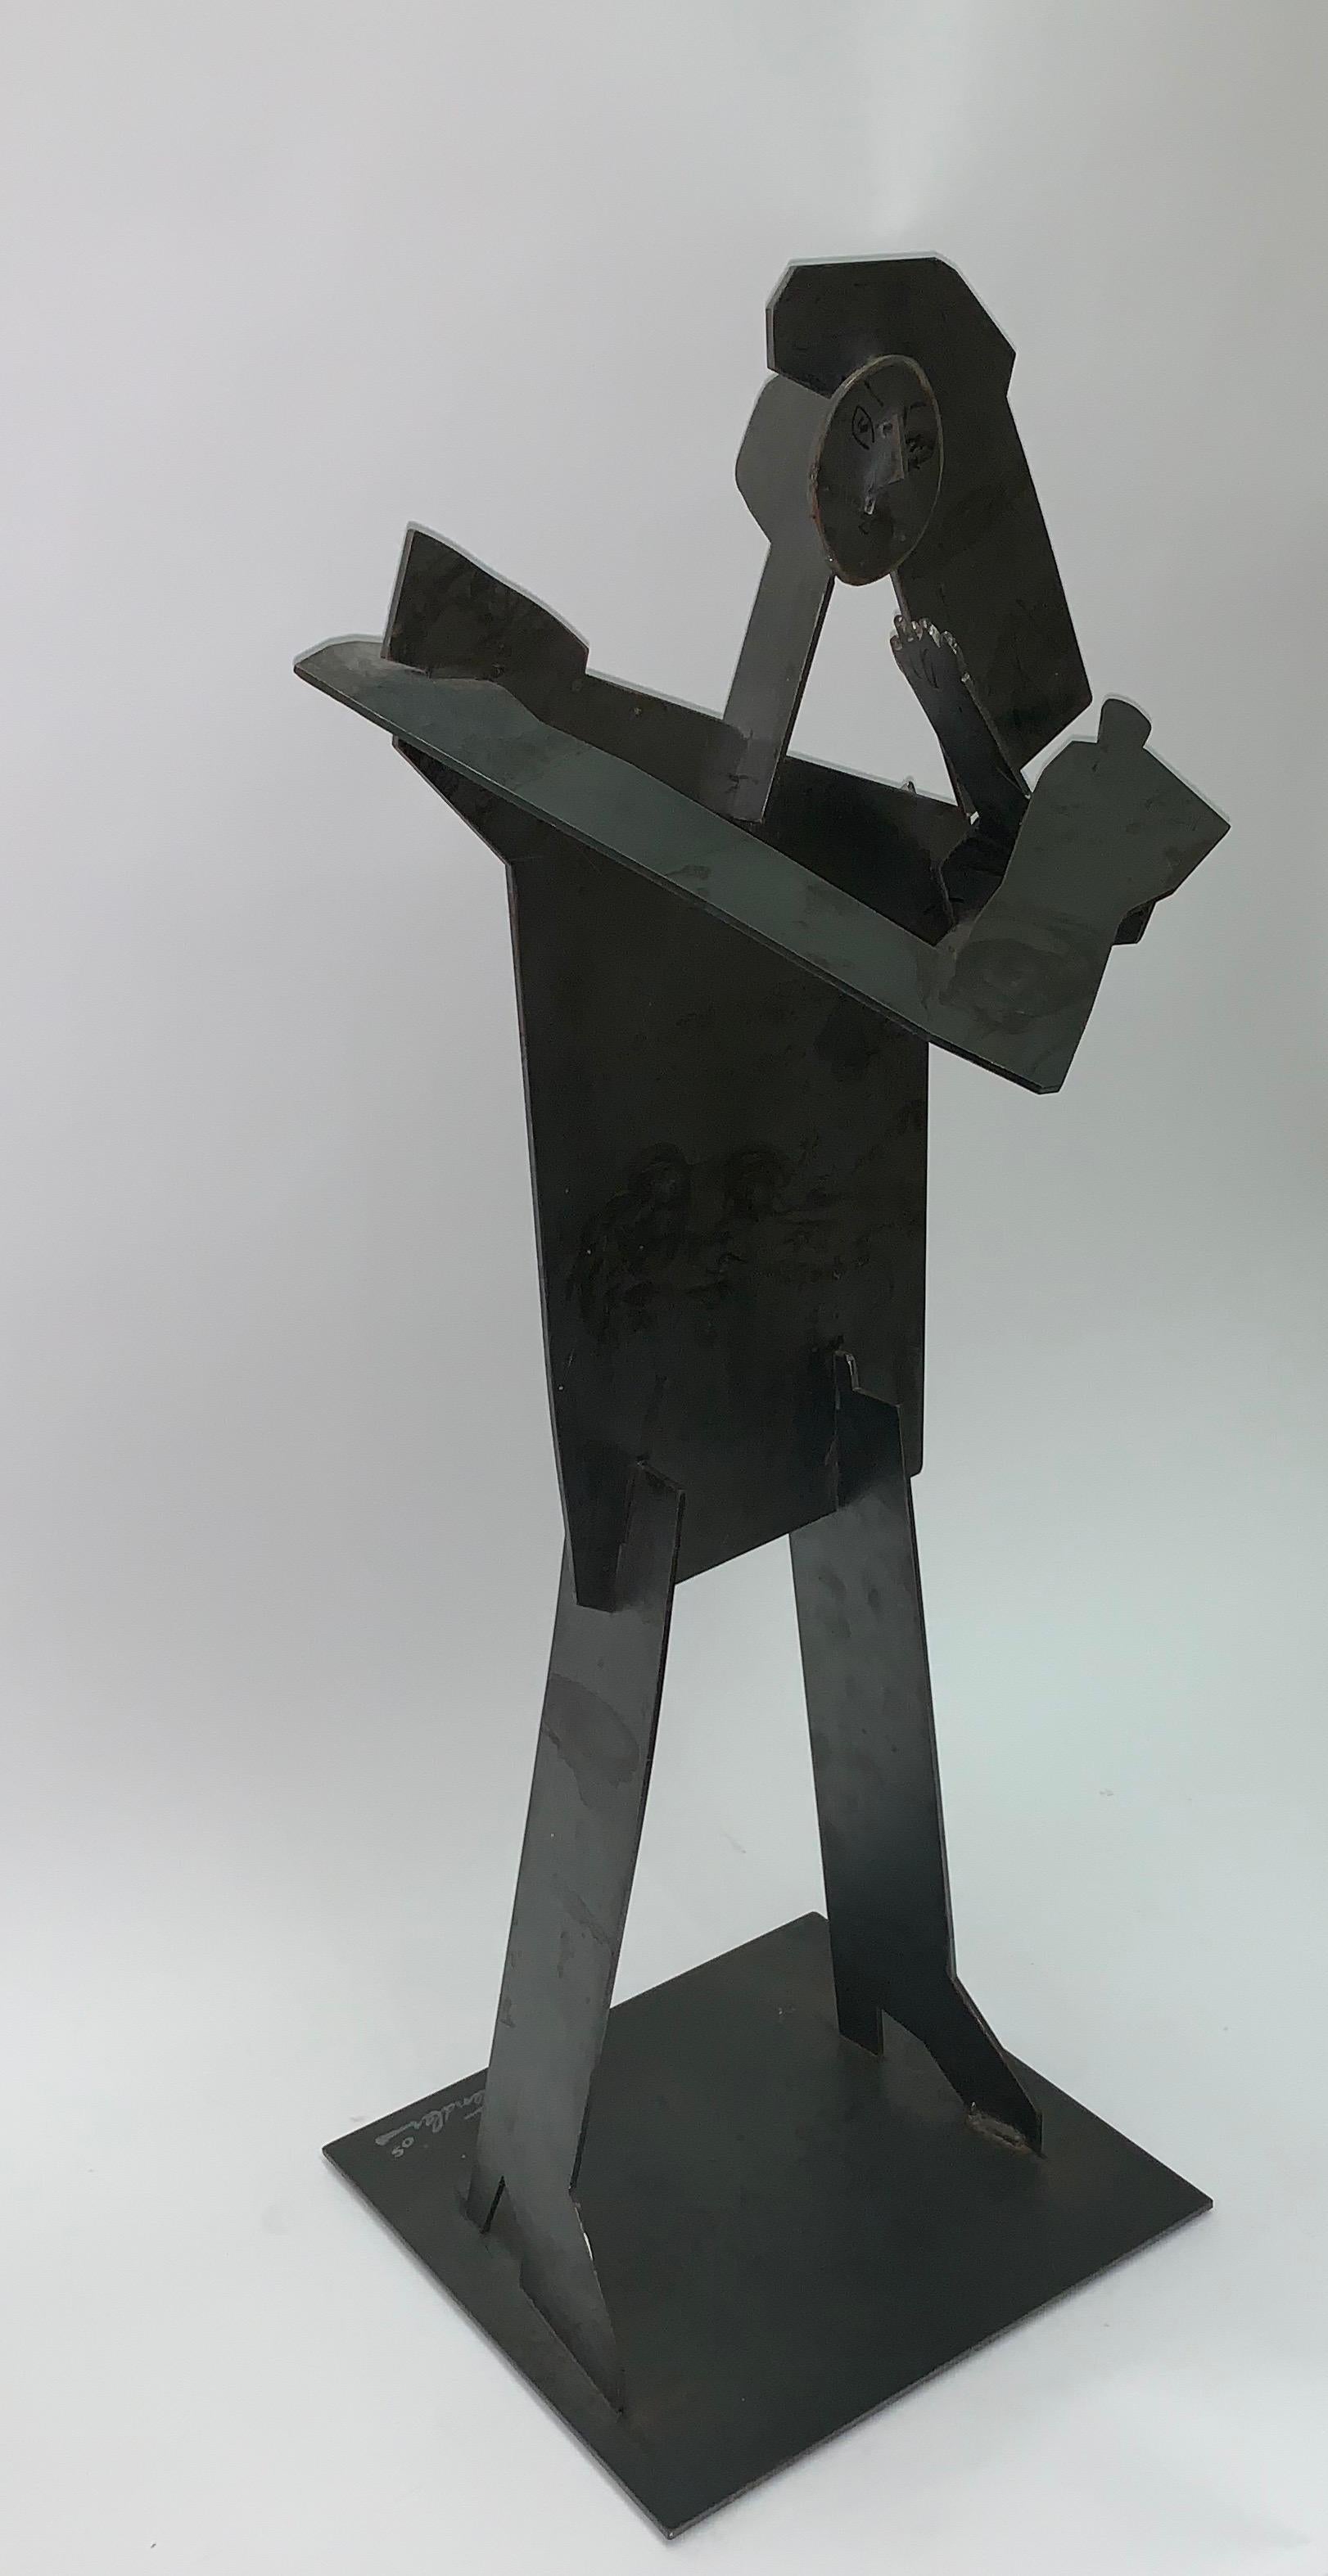 Abstract cubist iron sculpture of a standing figure by the American artist Erin Tendler dated 2005. This sculpture was created by combining various geometric iron shapes. Signed by the artist on the top left corner.

Property from esteemed interior